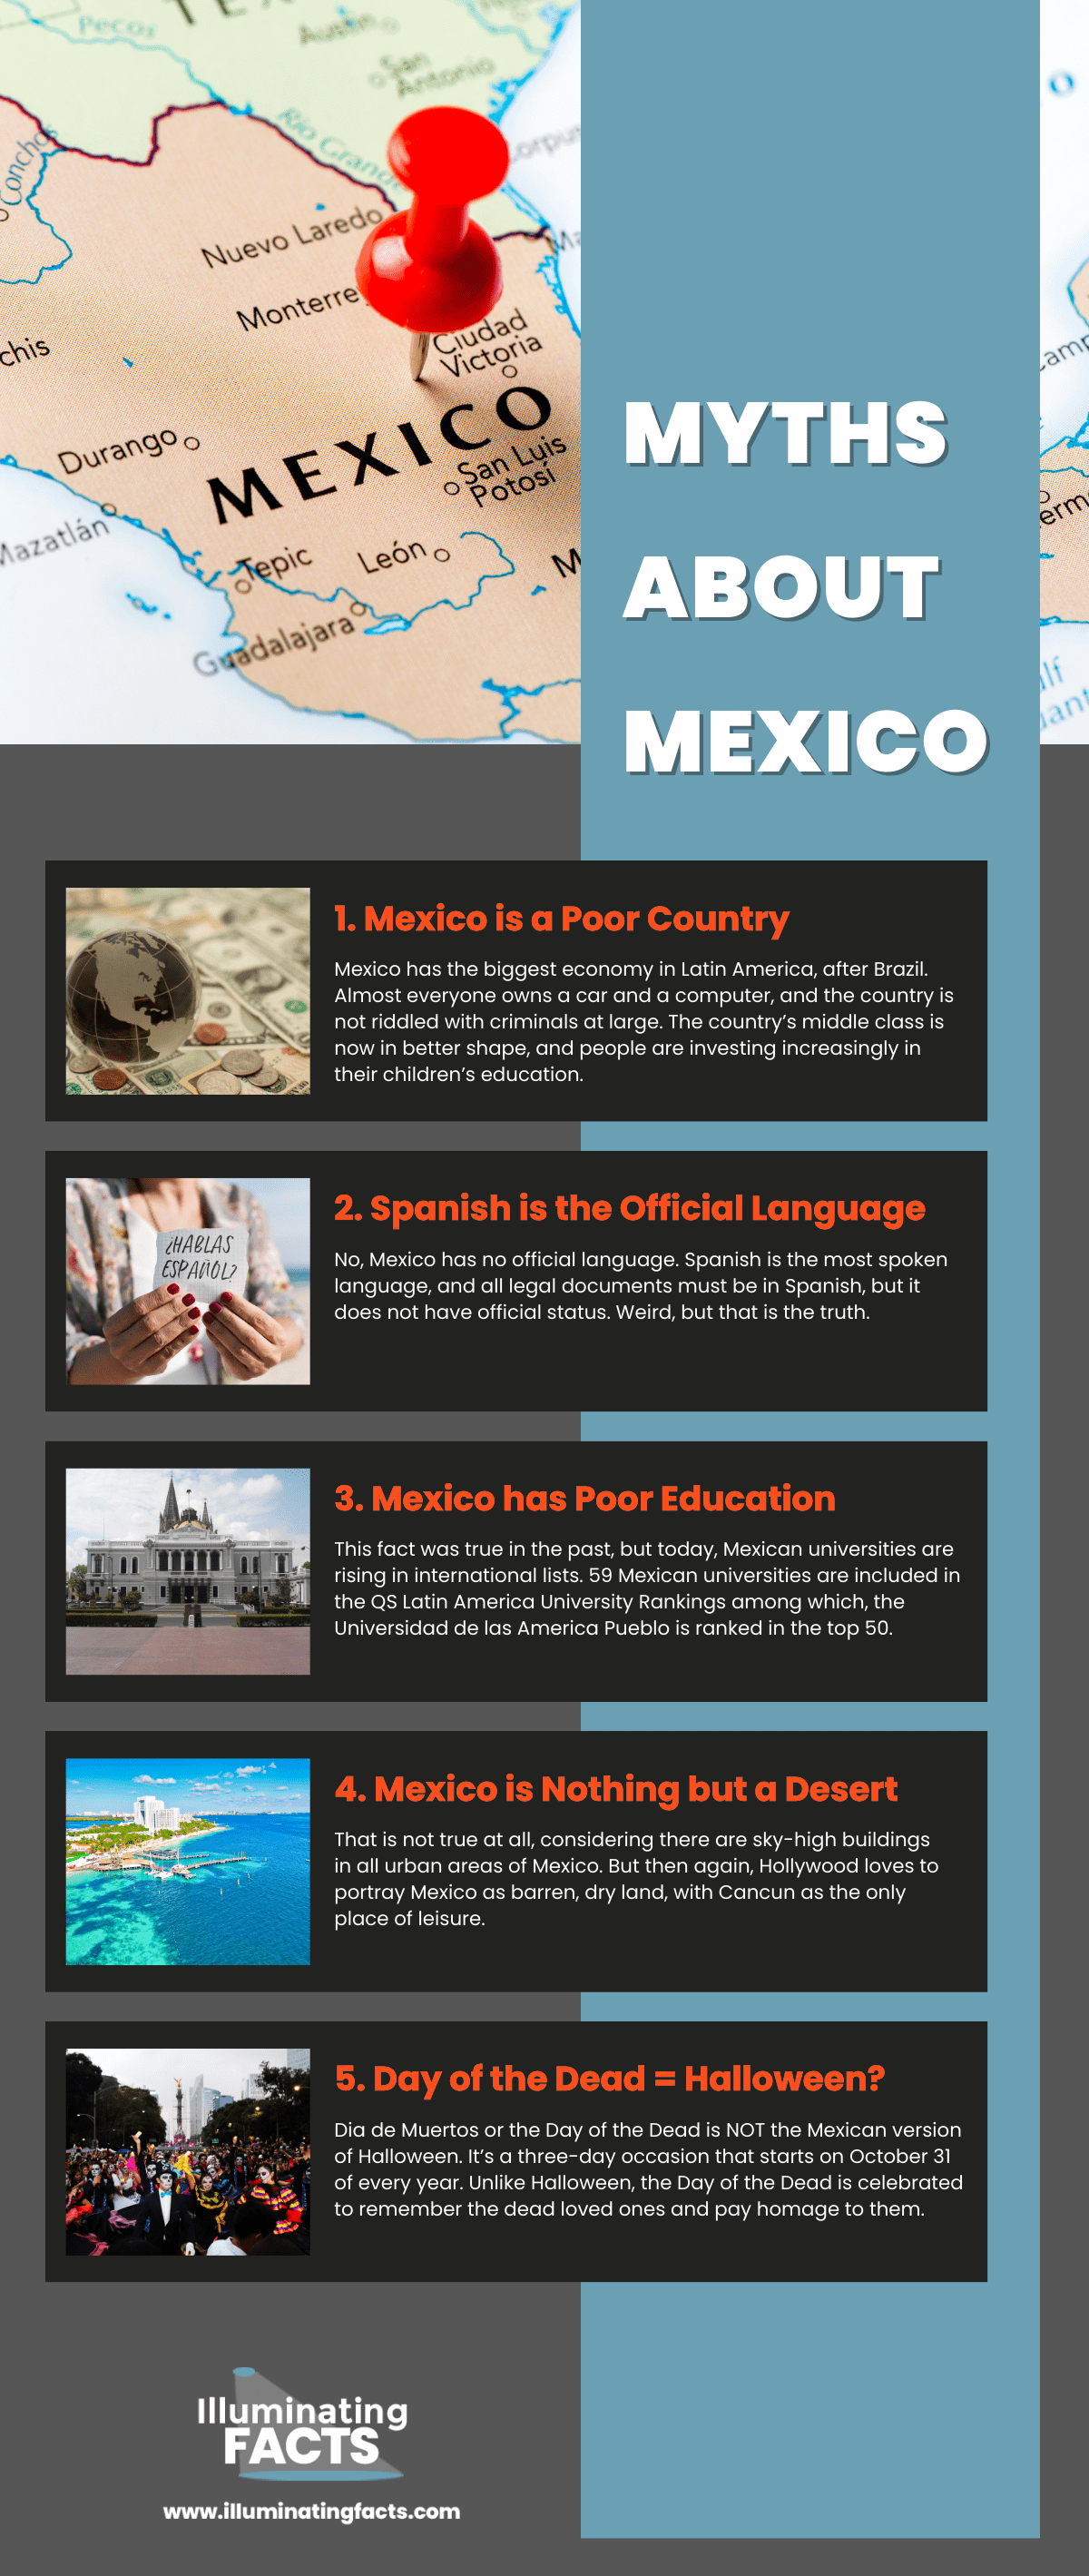 Myths about Mexico